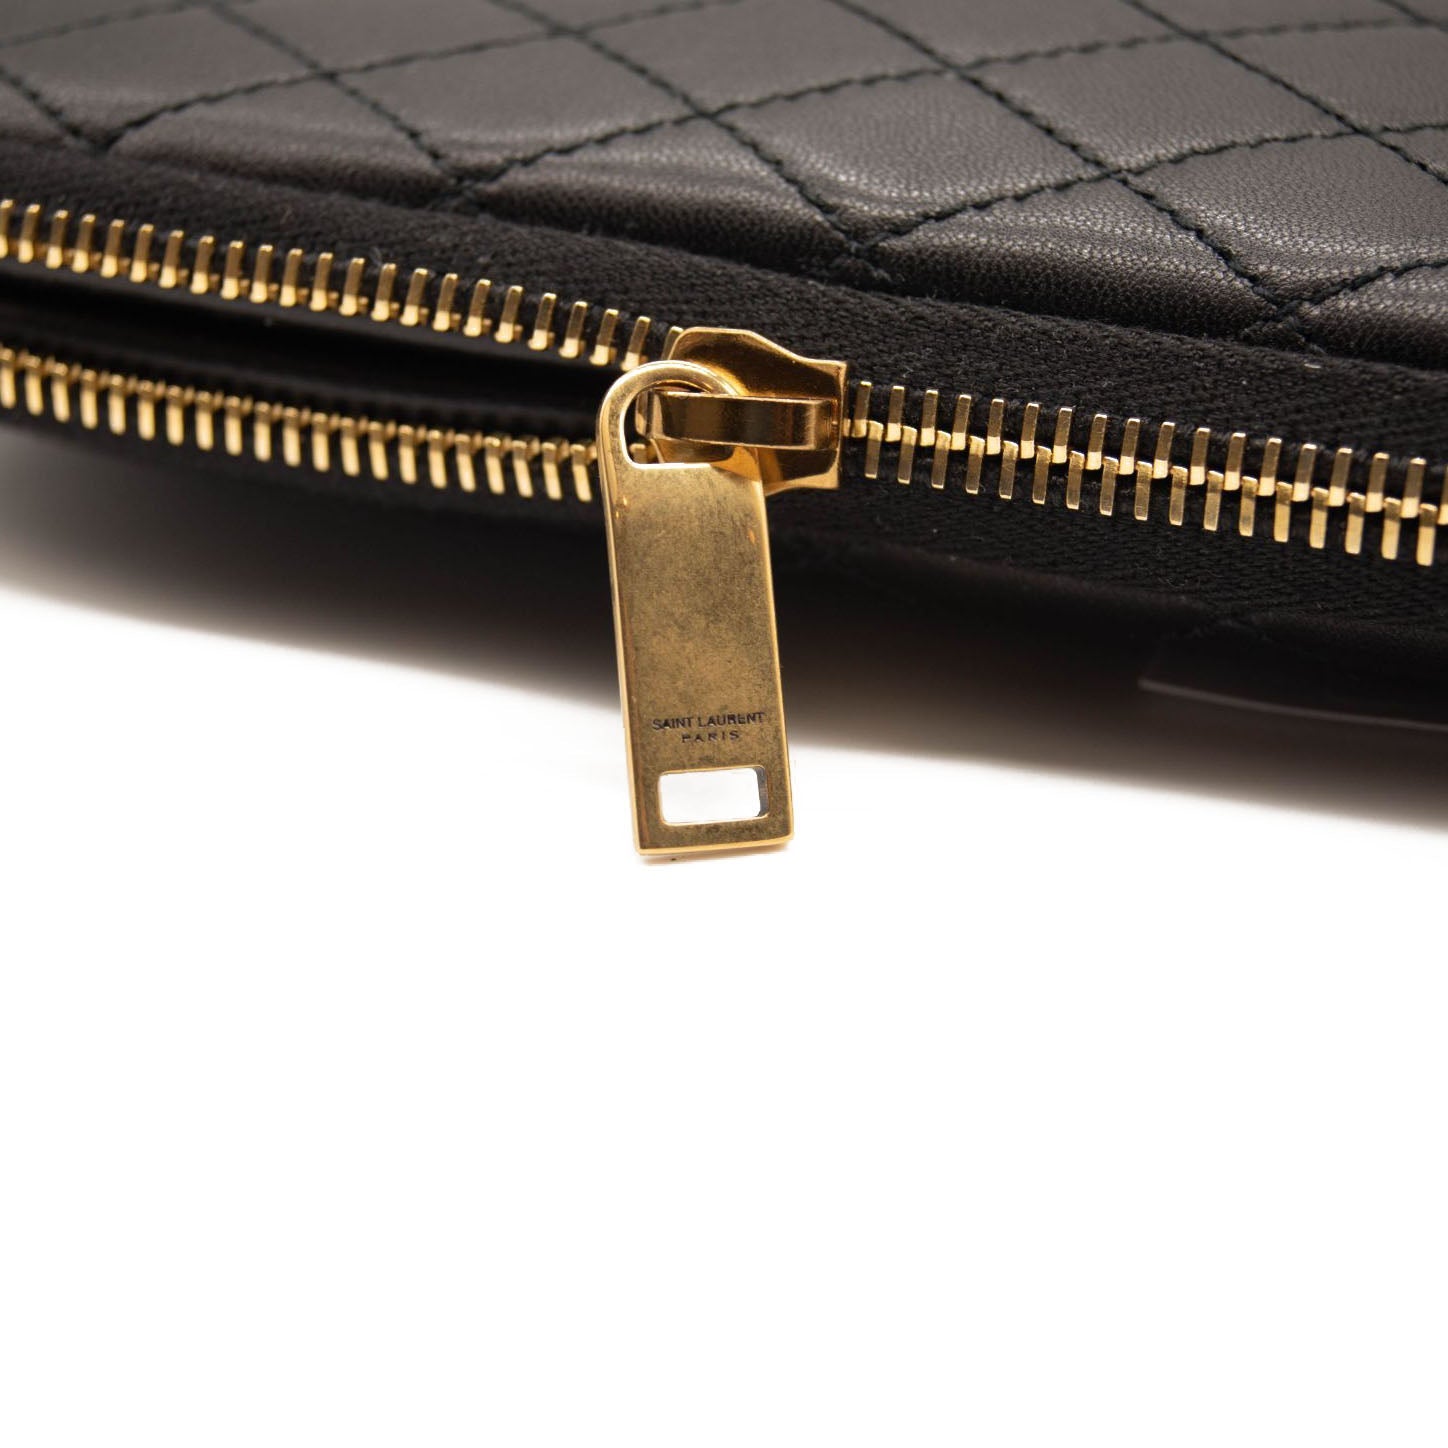 Saint Laurent Mini Gaby Quilted Leather Crossbody